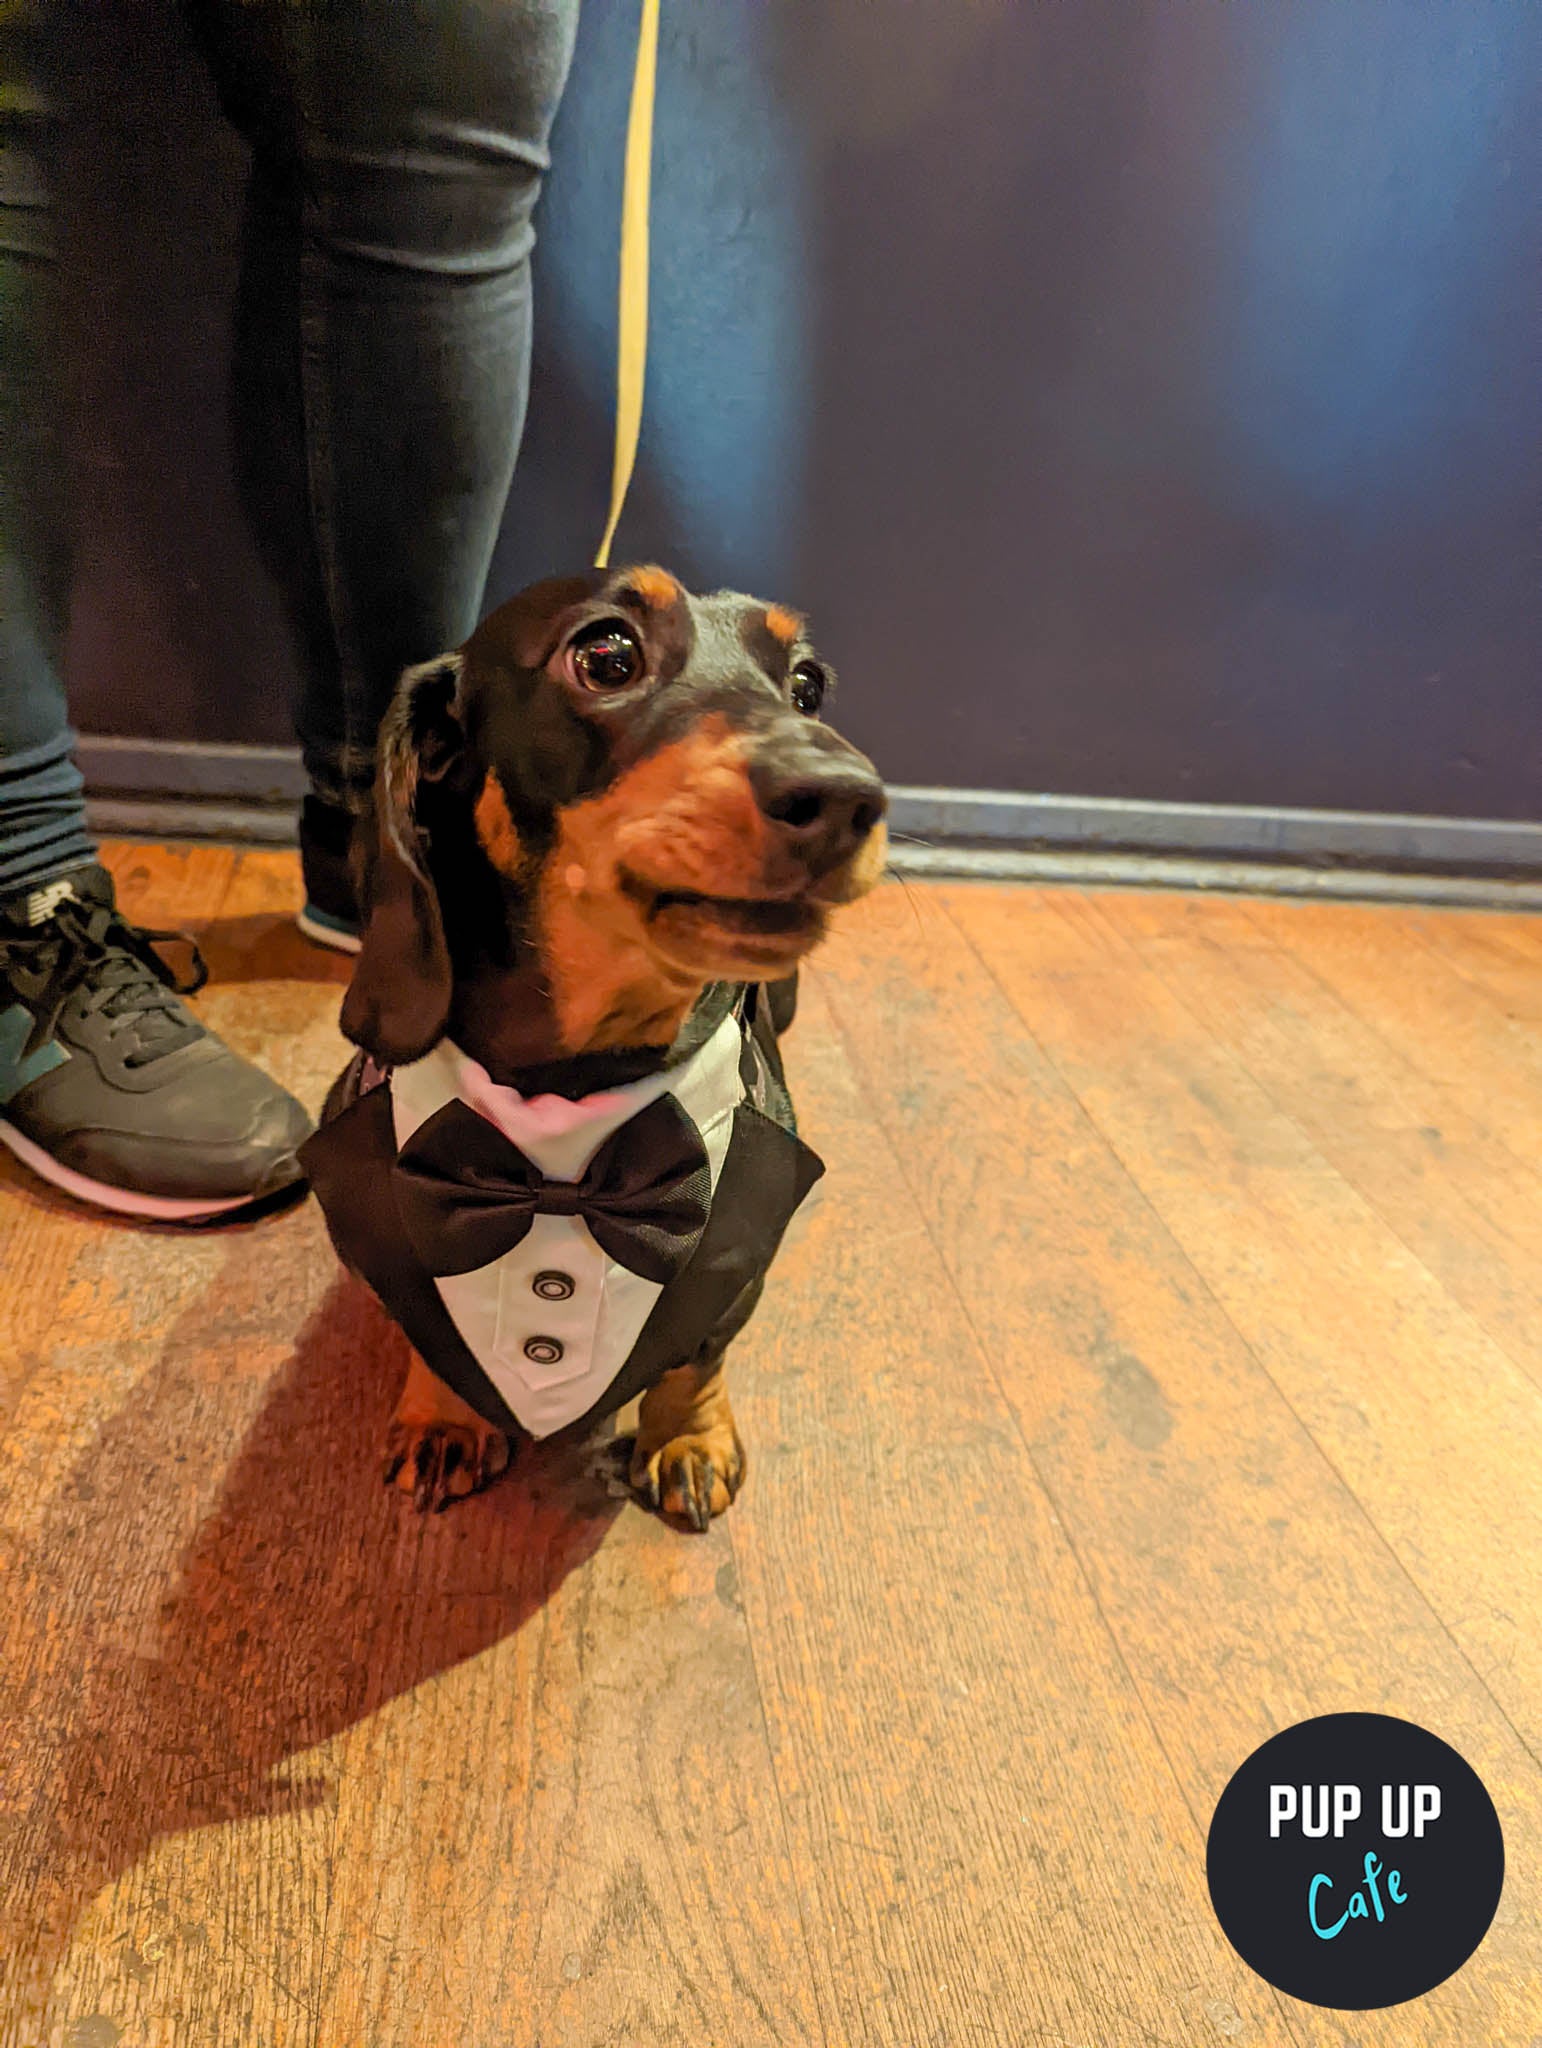 A sausage dog dressed in a bow tie enjoys the Pup Up Cafe